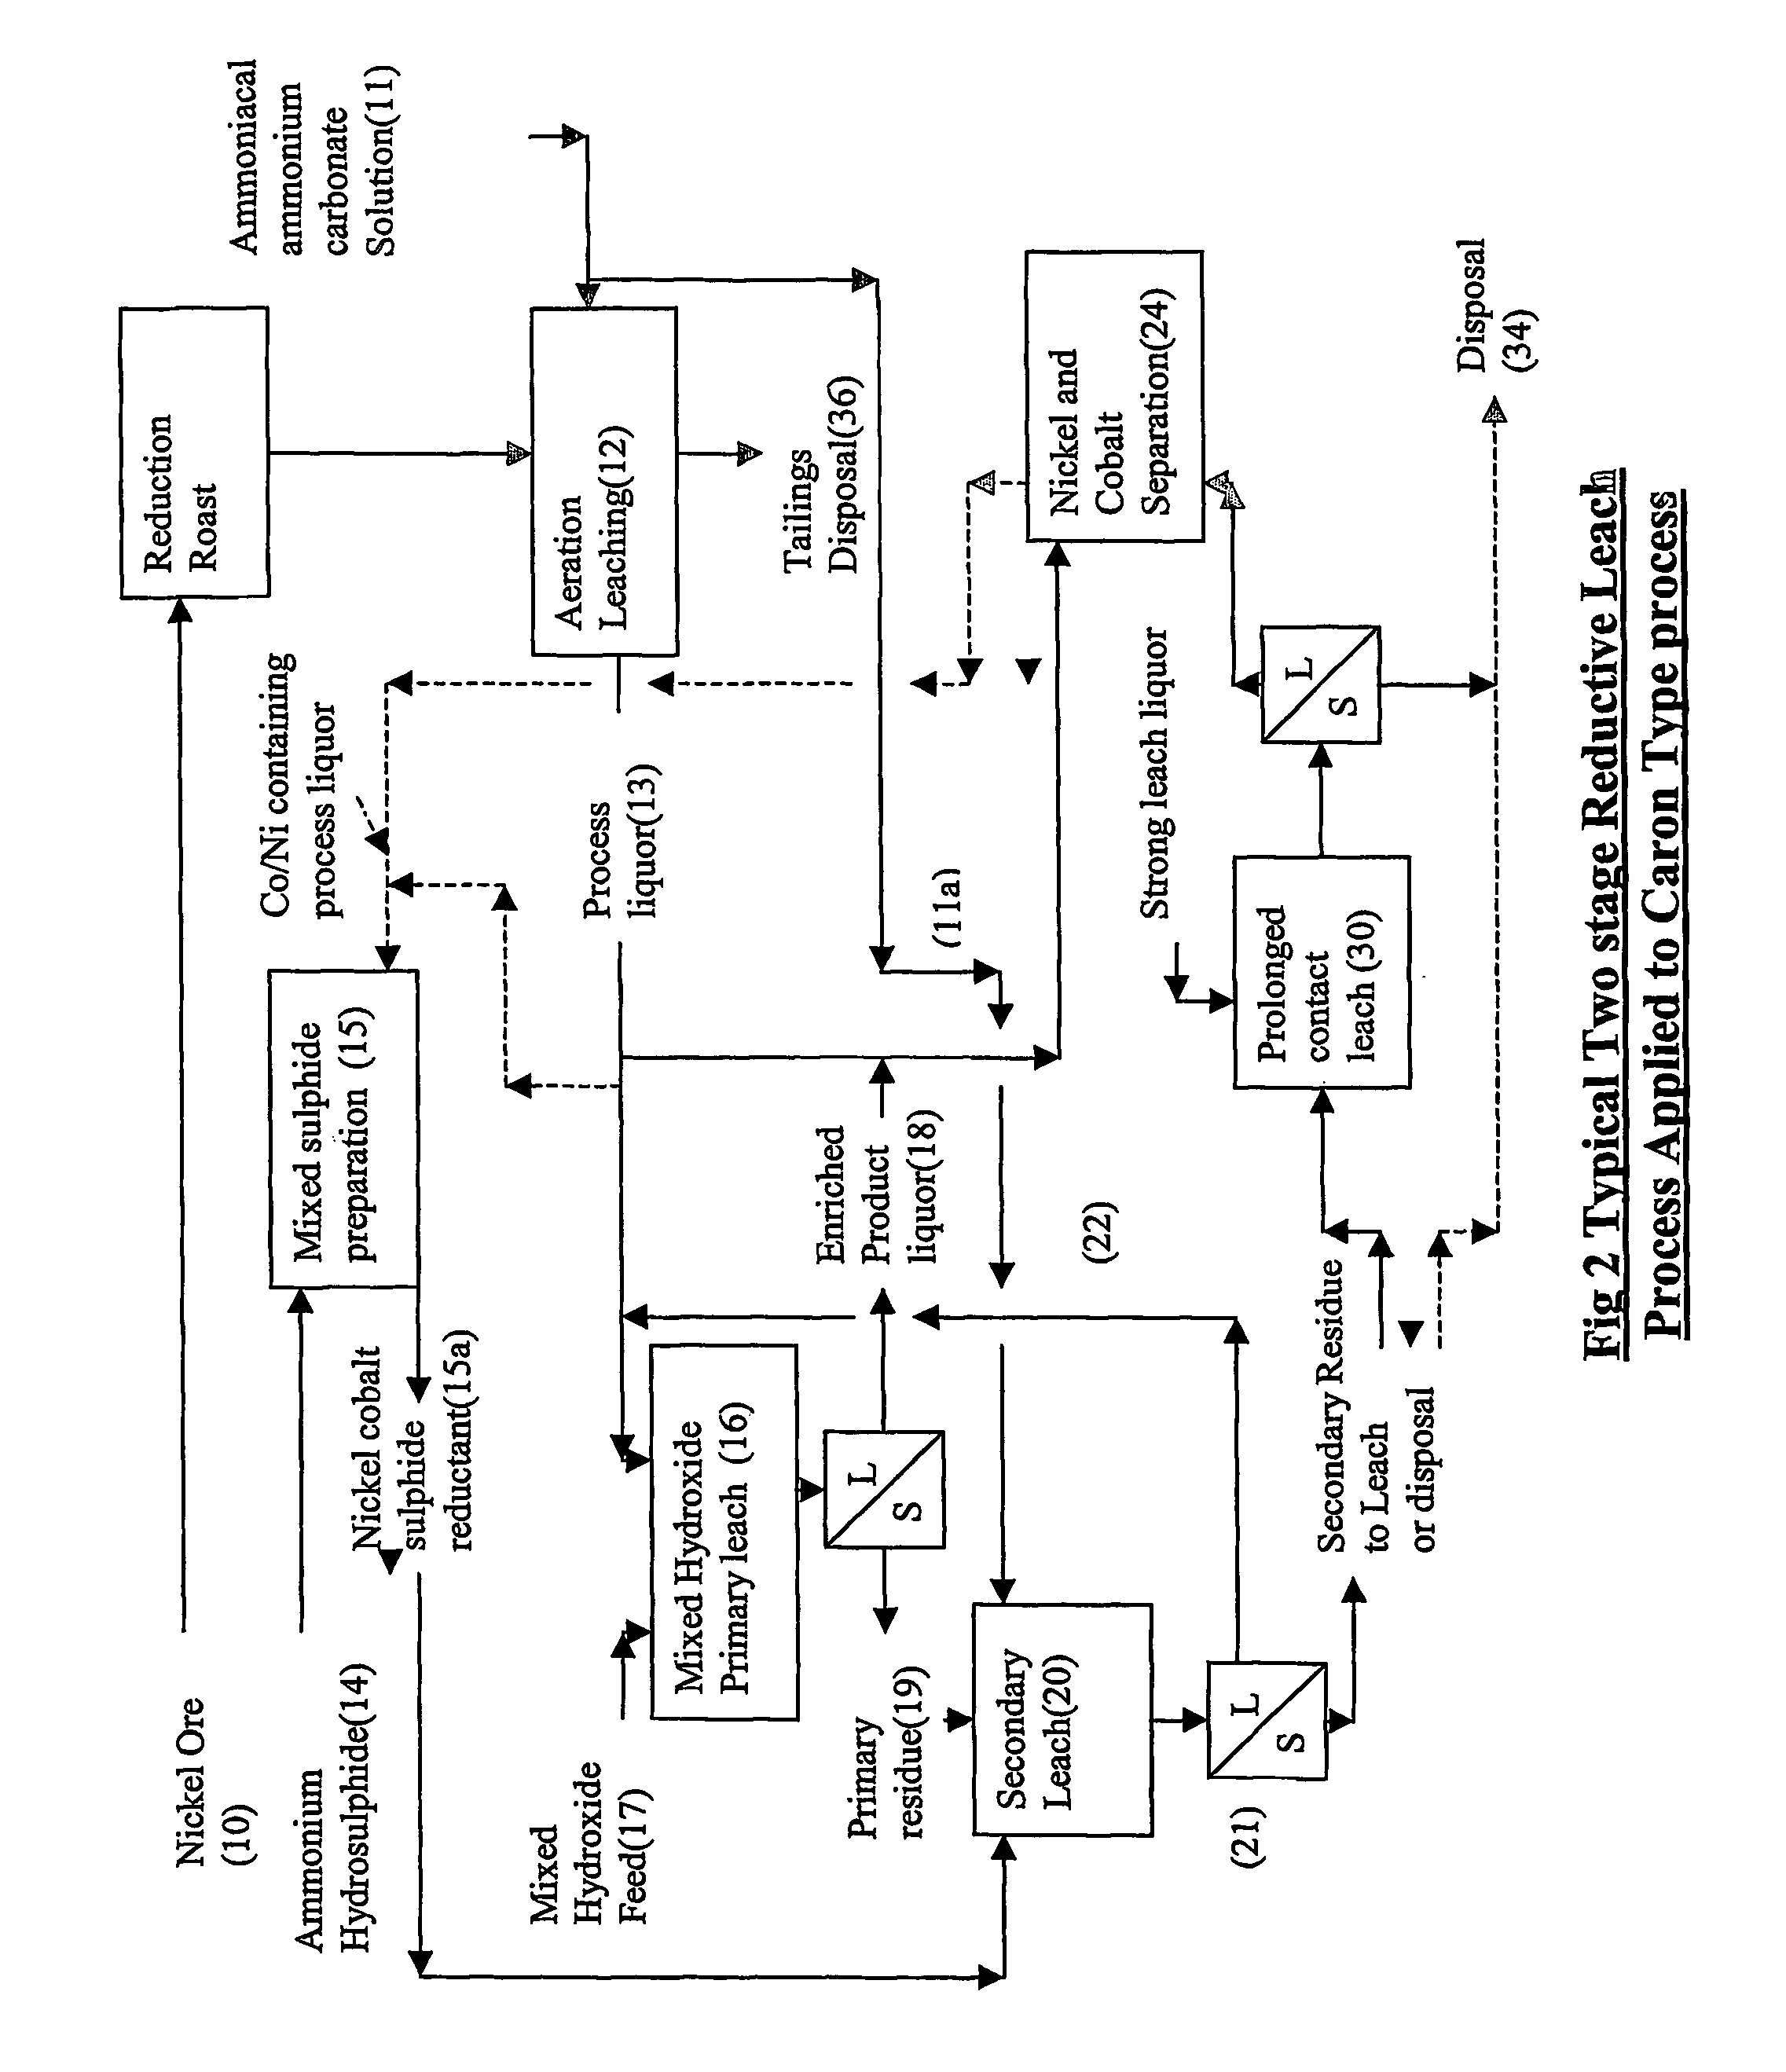 Reductive ammoniacal leaching of nickel and coblat bearing